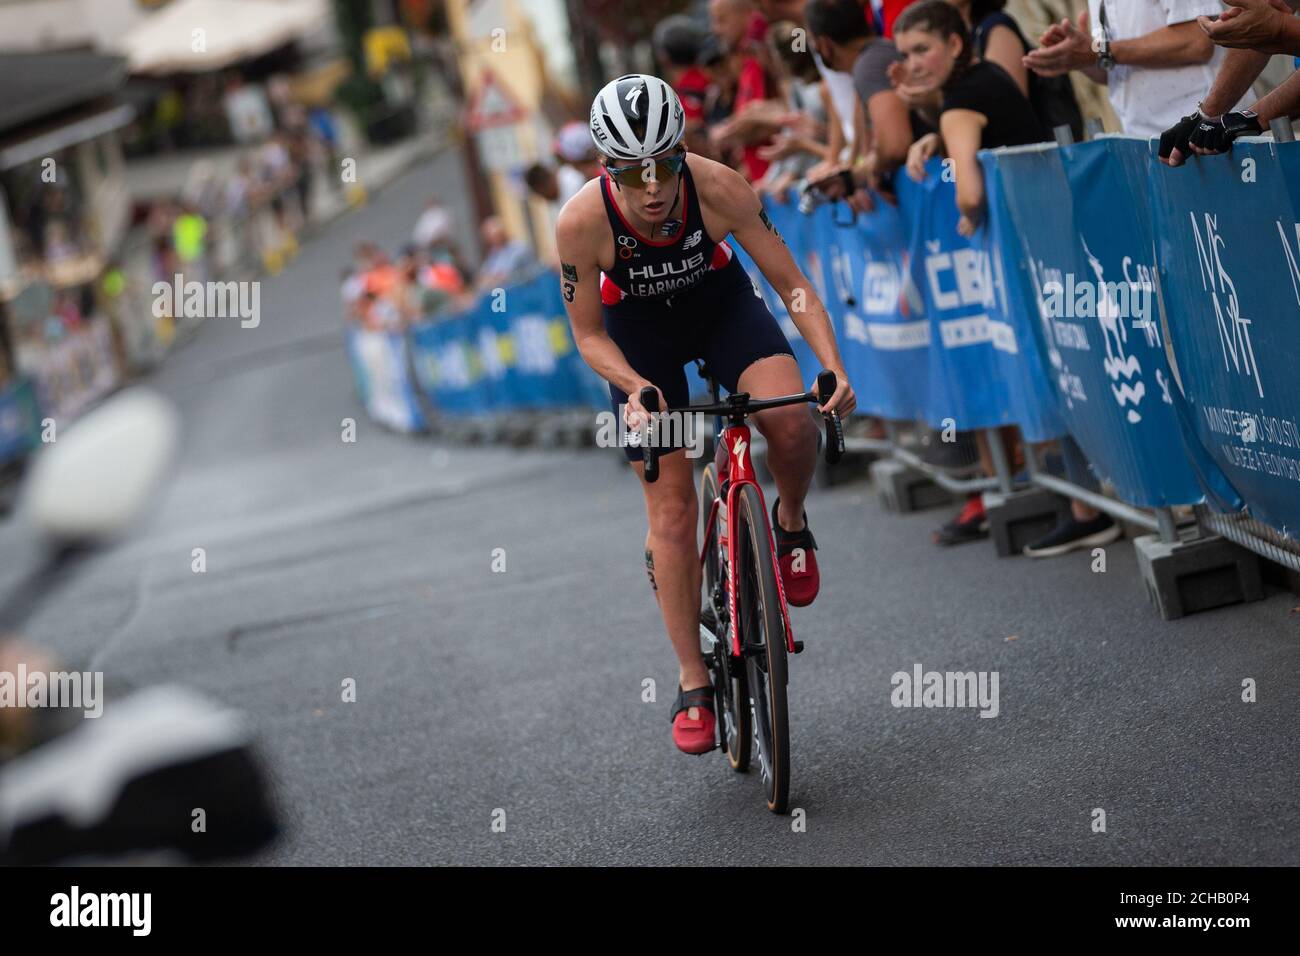 Jessica Learmonth of Great Britain in action during the Karlovy Vary ITU Triathlon World Cup in Karlovy Vary, Czech Republic, September 13, 2020. (CTK Stock Photo